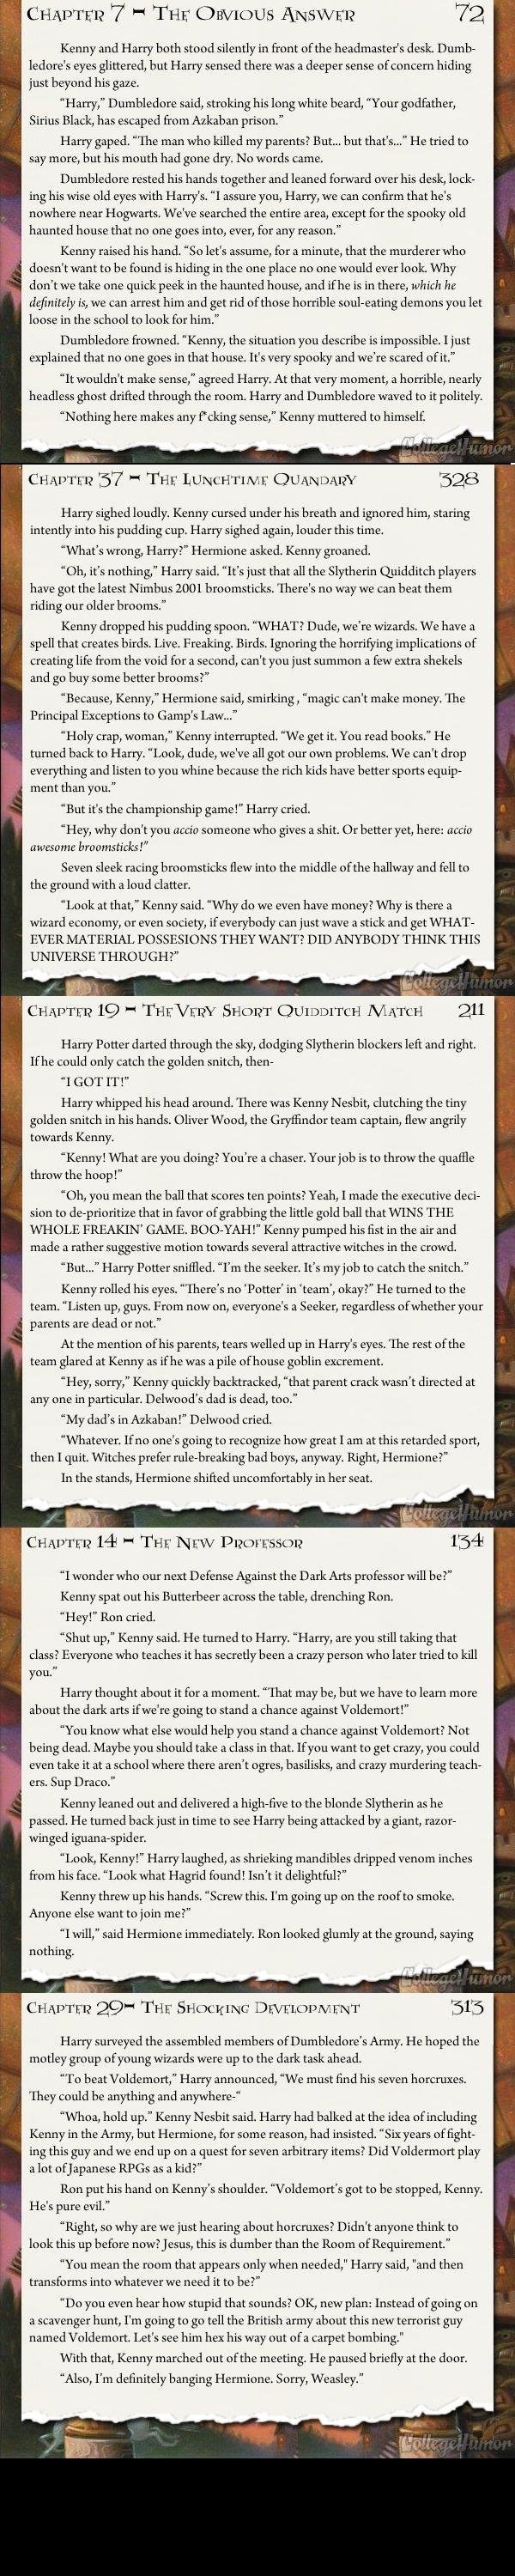 Harry Potter Deleted Character. I Lmao'd so hard after reading this this is what happened when there was another character in the harry Potter series&lt;br /&gt